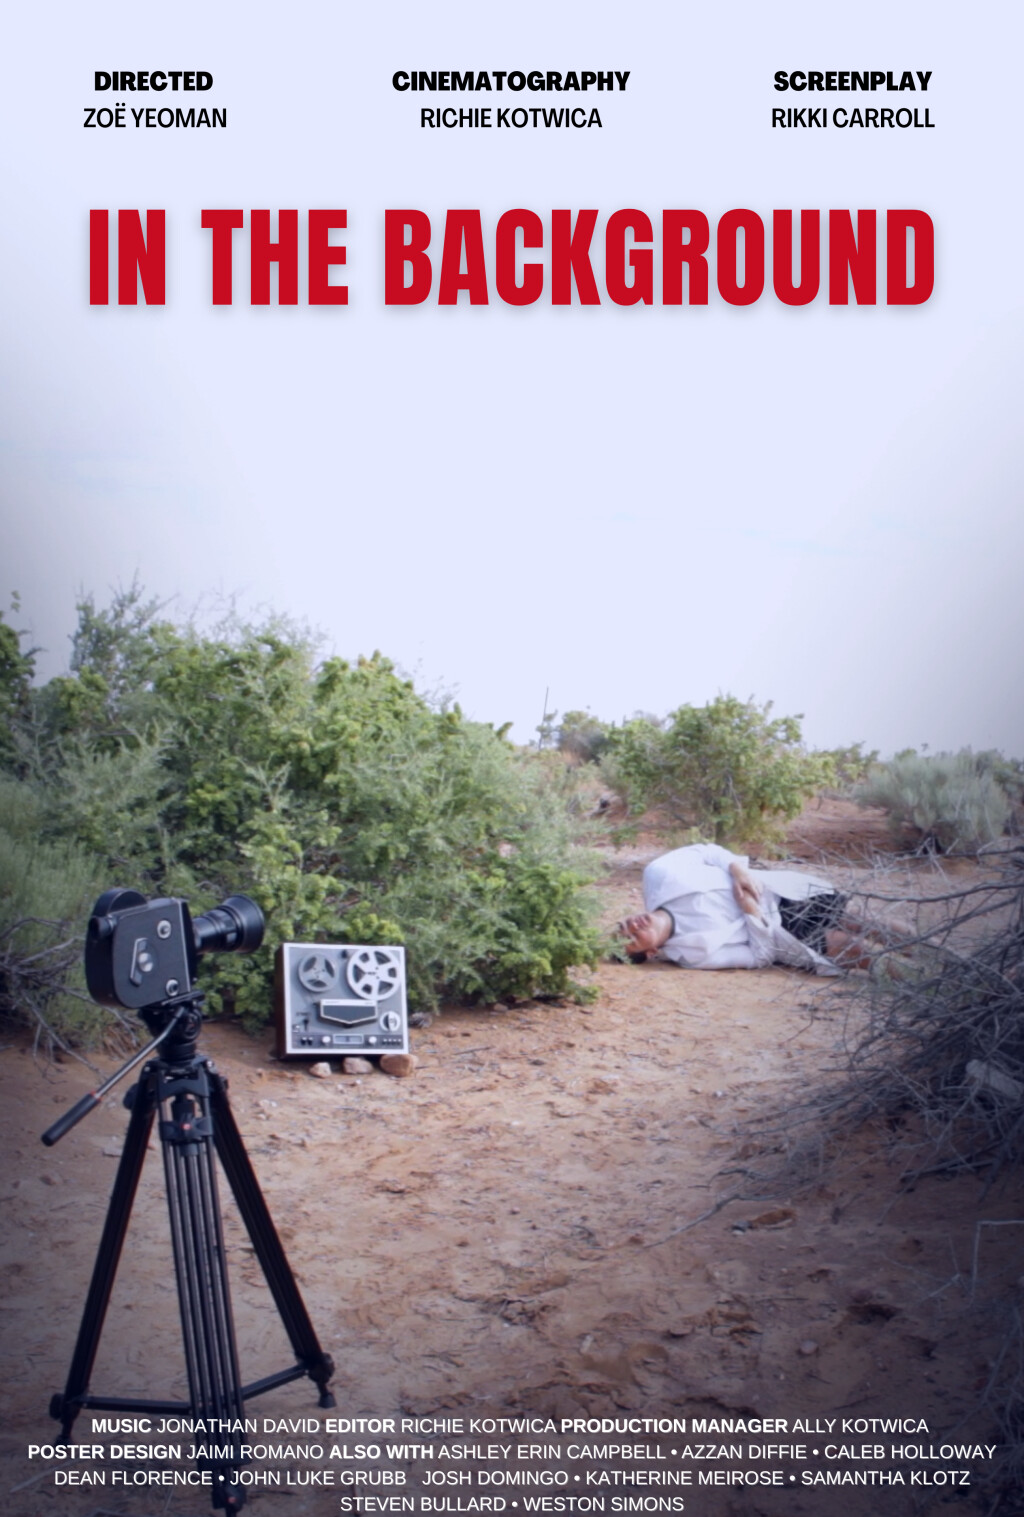 Filmposter for IN THE BACKGROUND